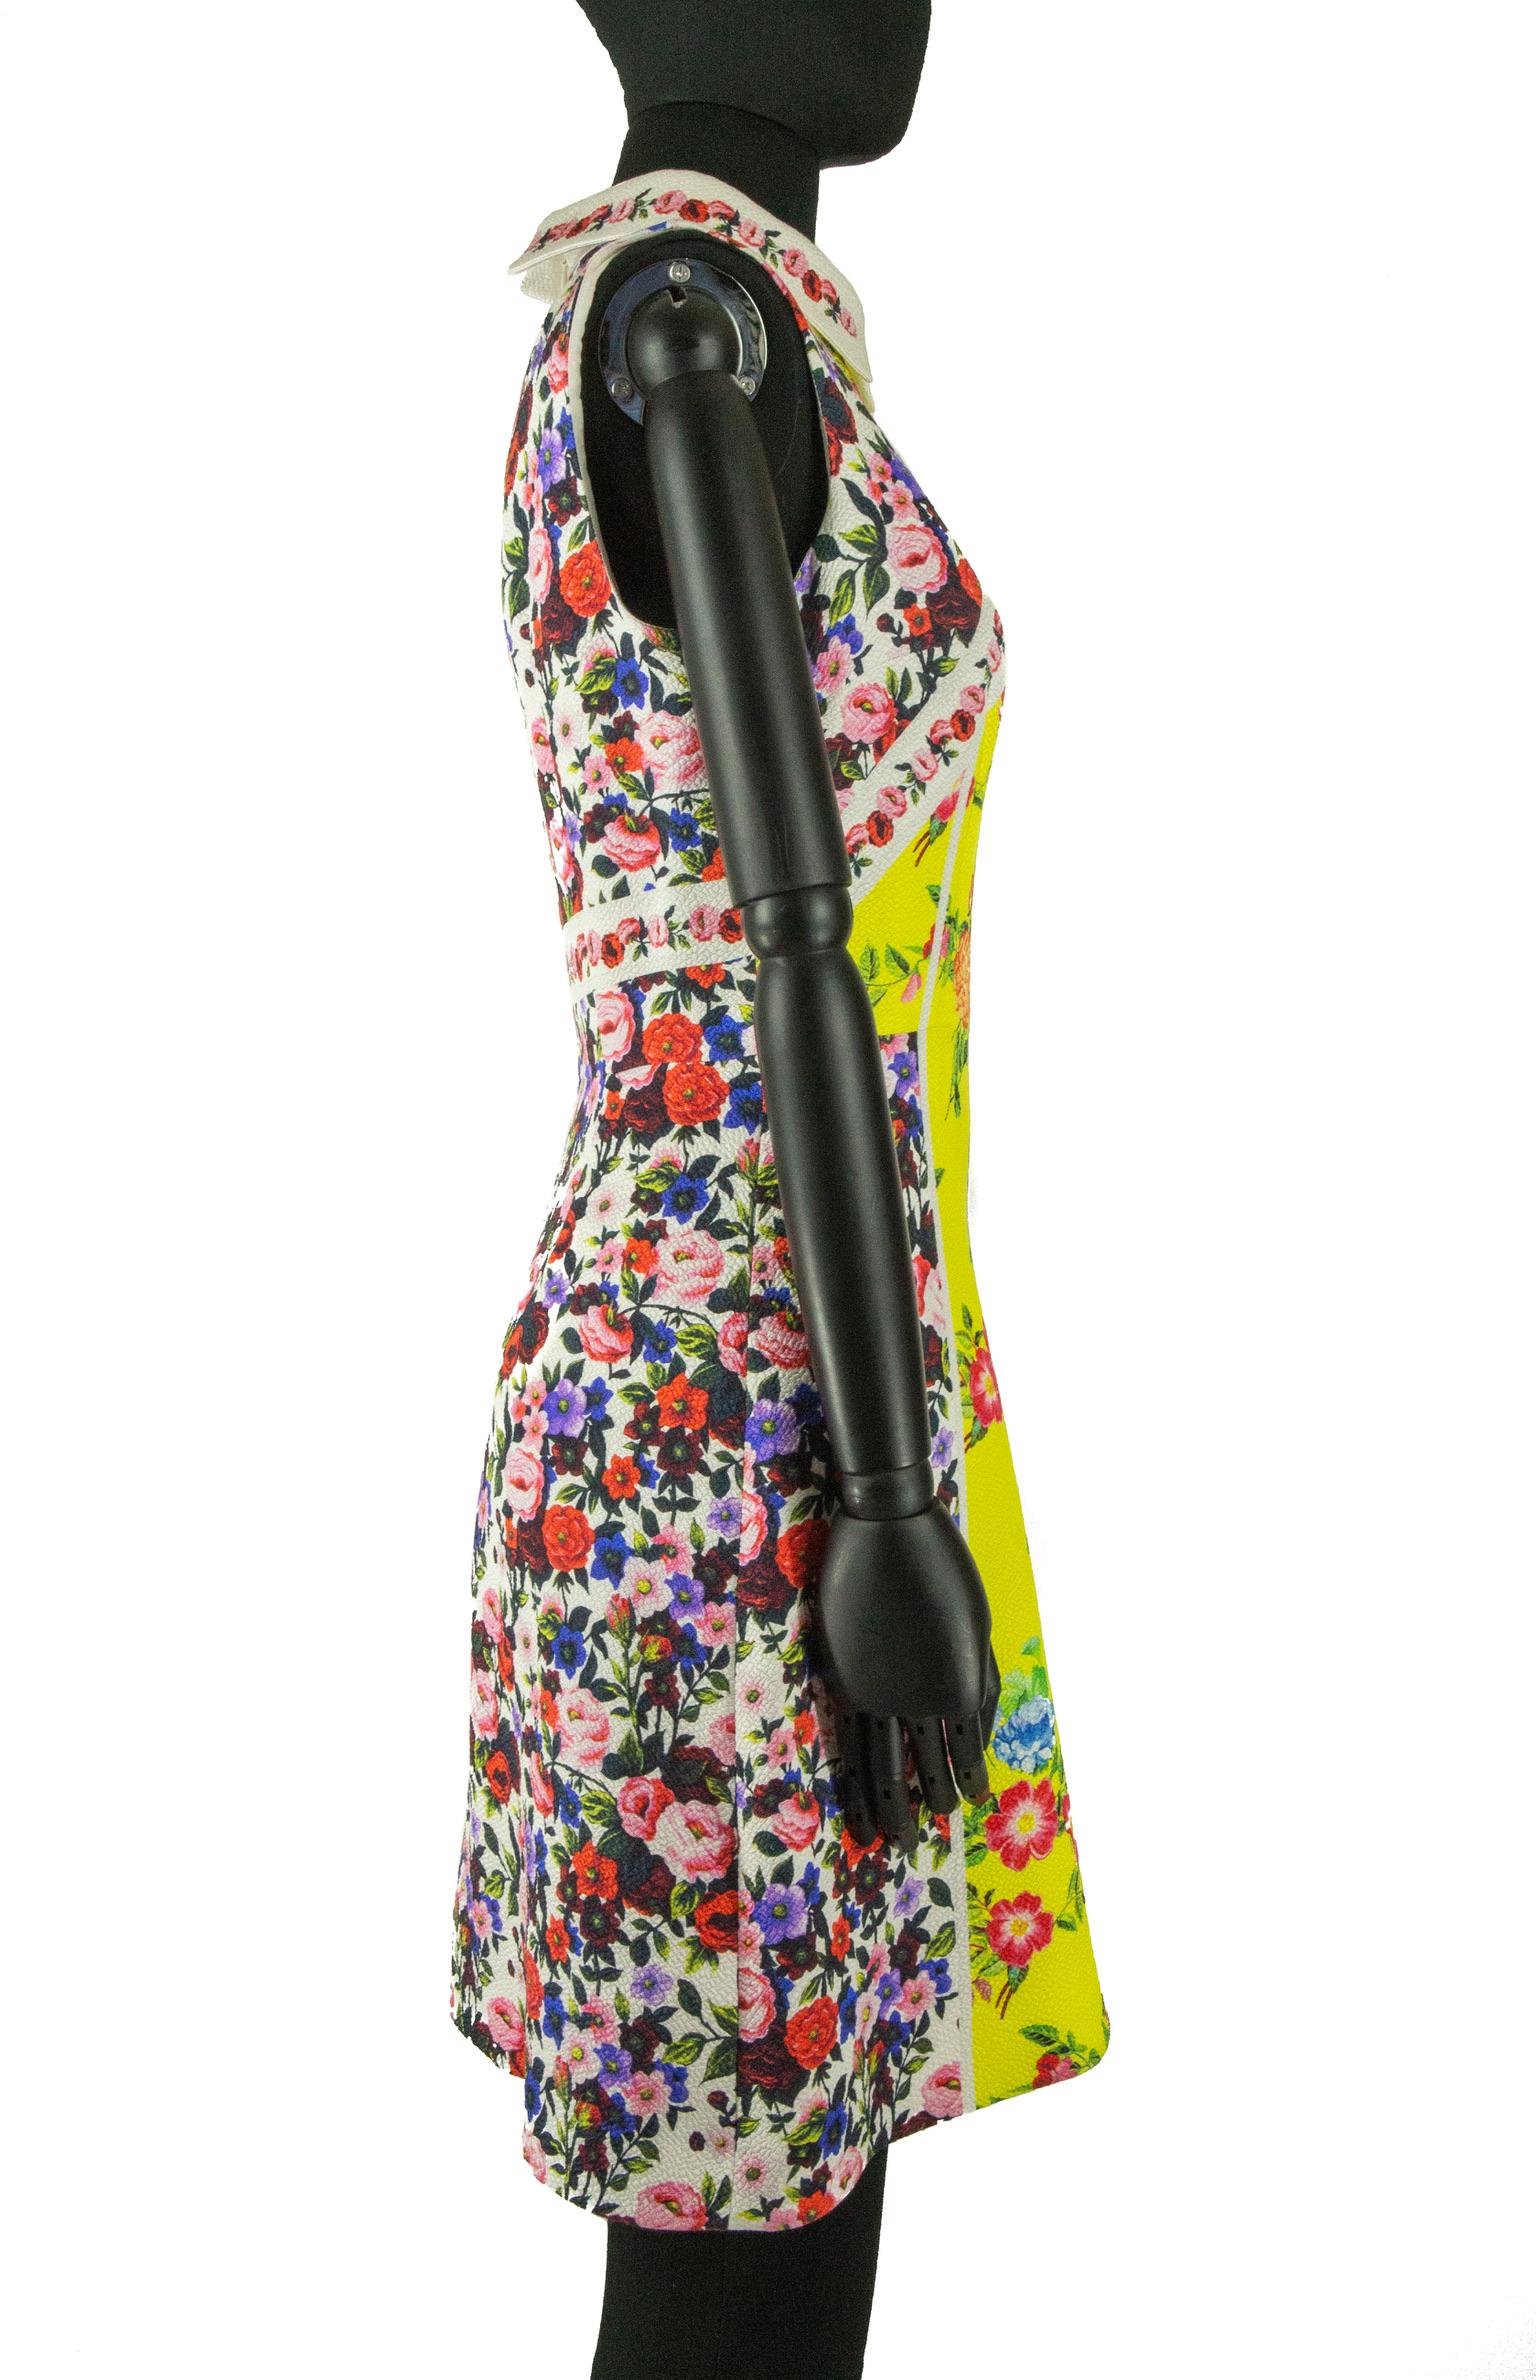 A Mary Katrantzou skater dress adorned in the brand's iconic prints, of symmetrical floral print with roses and peonies in shades of pink and red on a lemon yellow. The darted bodice is sleeveless with a standard collar, attached to an A-line skirt.